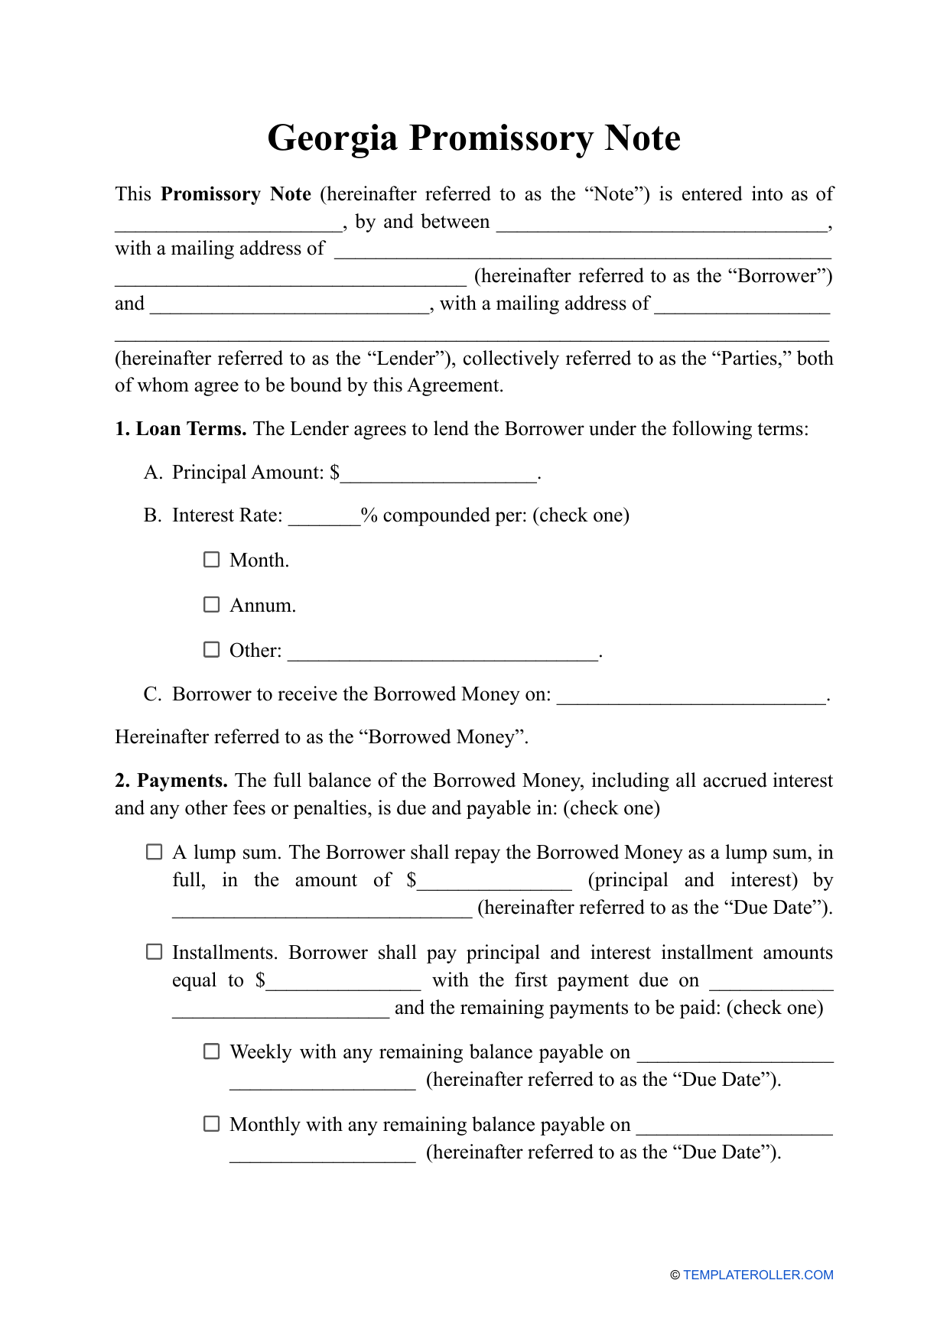 Promissory Note Template for Georgia (United States)